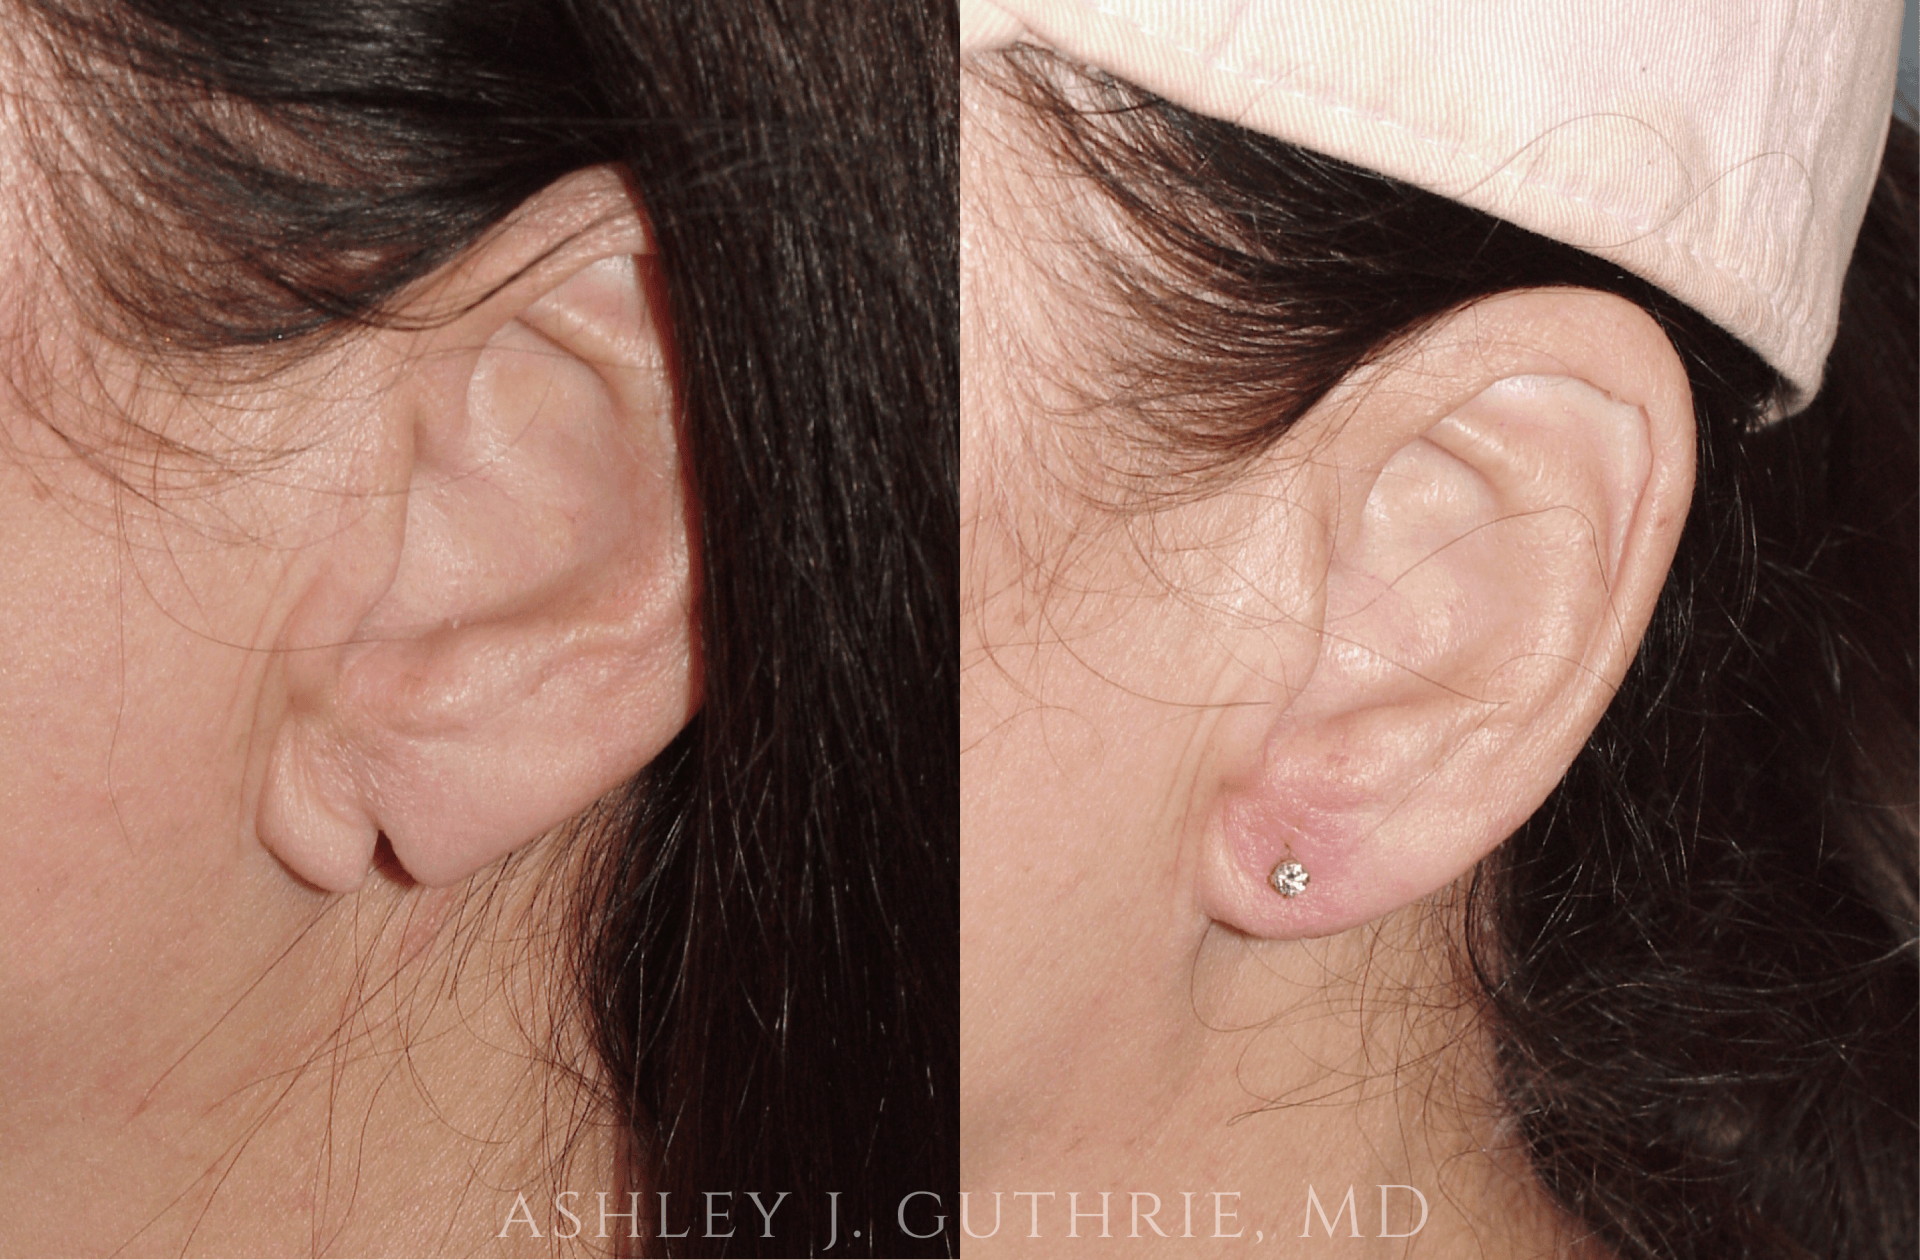 closeup of woman's ears before and after earlobe repair